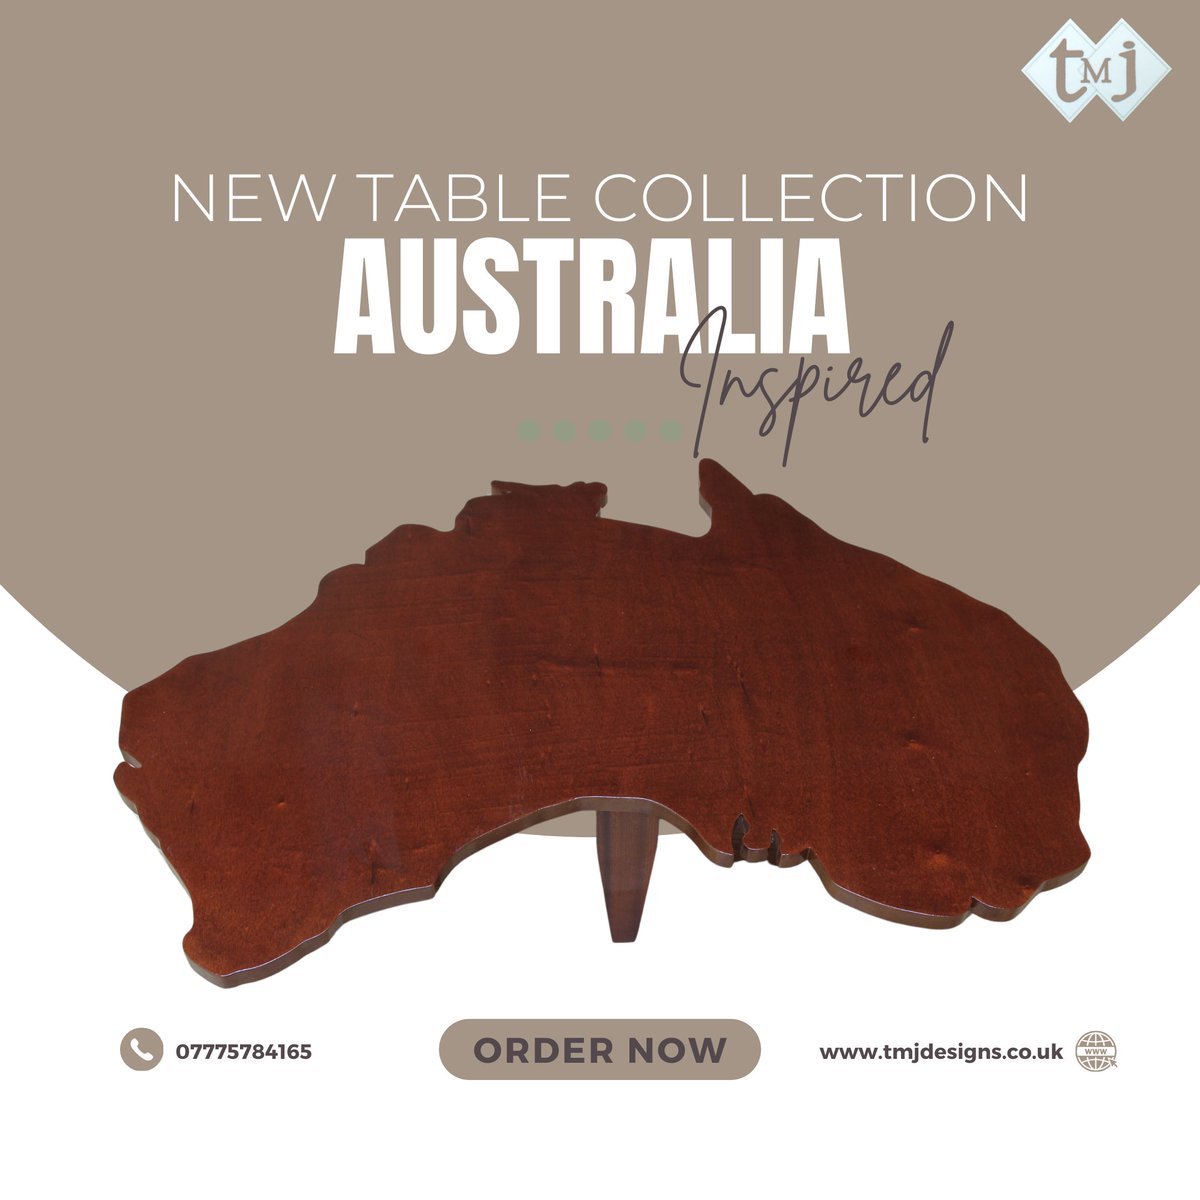 Where modern design meets cultural inspiration. Crafted in the shape of Australia, this table adds a unique and artistic flair to your space. With a sturdy build and attention to detail, it stands out as a functional yet captivating centrepiece.

 #Australia #AustraliaInfluence